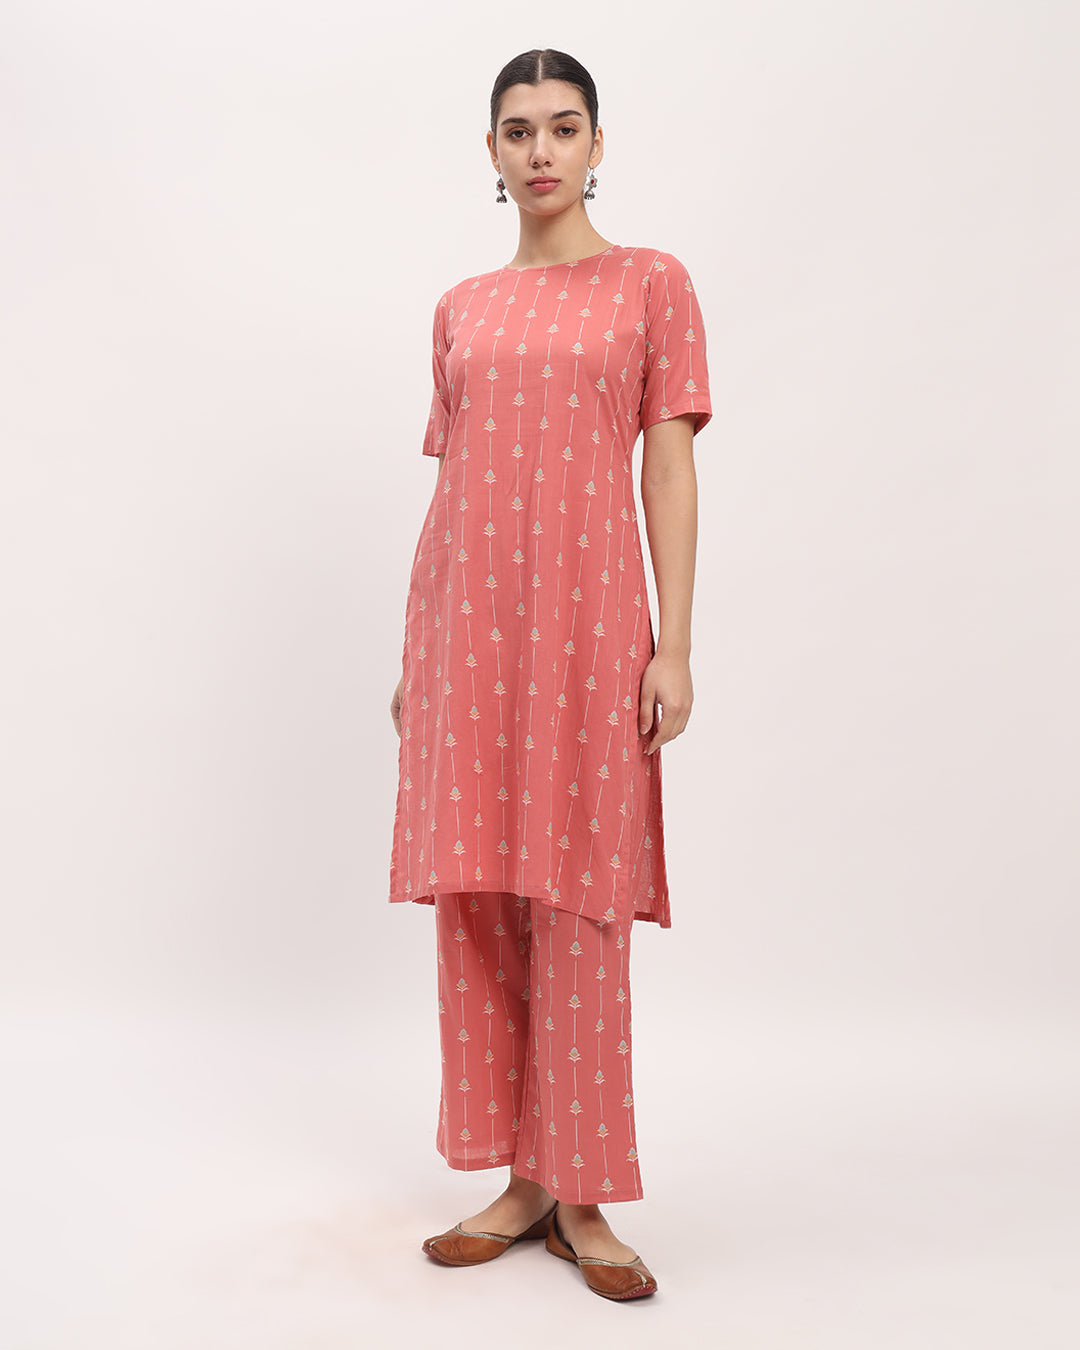 Combo: English Floral Track & Maple Leaf Round Neck Printed Kurta (Without Bottoms)